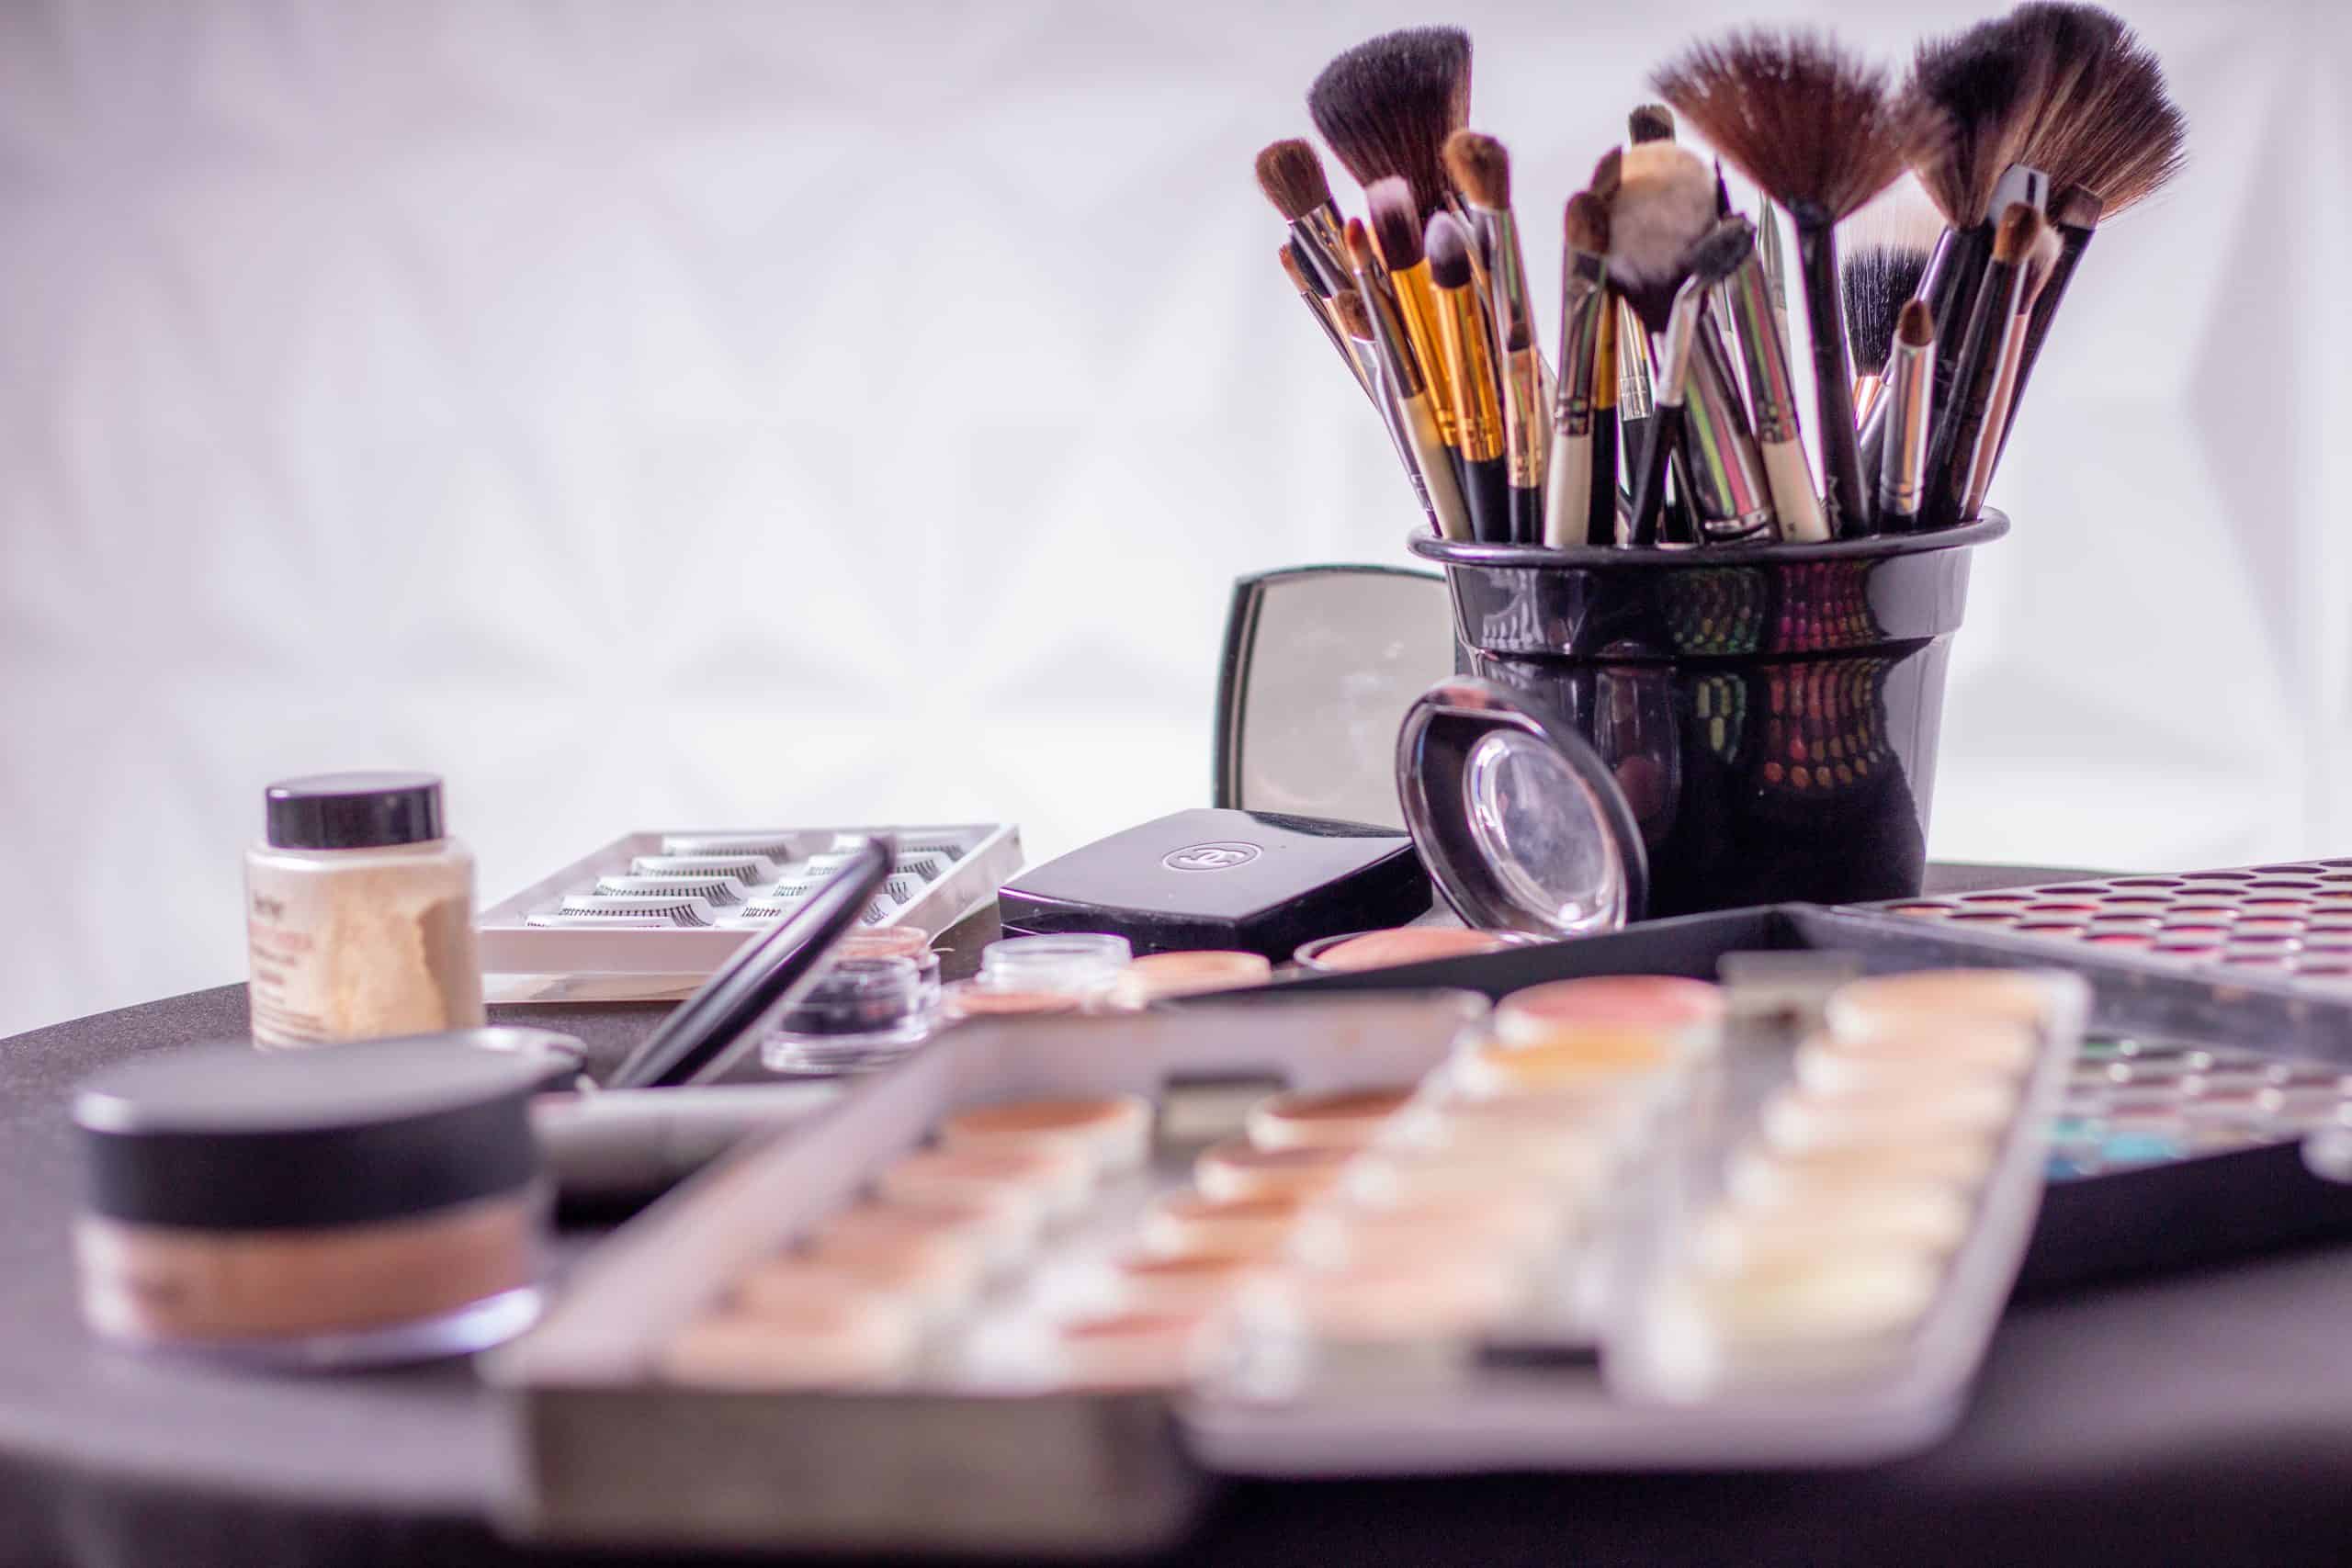 How to promote your makeup artist business